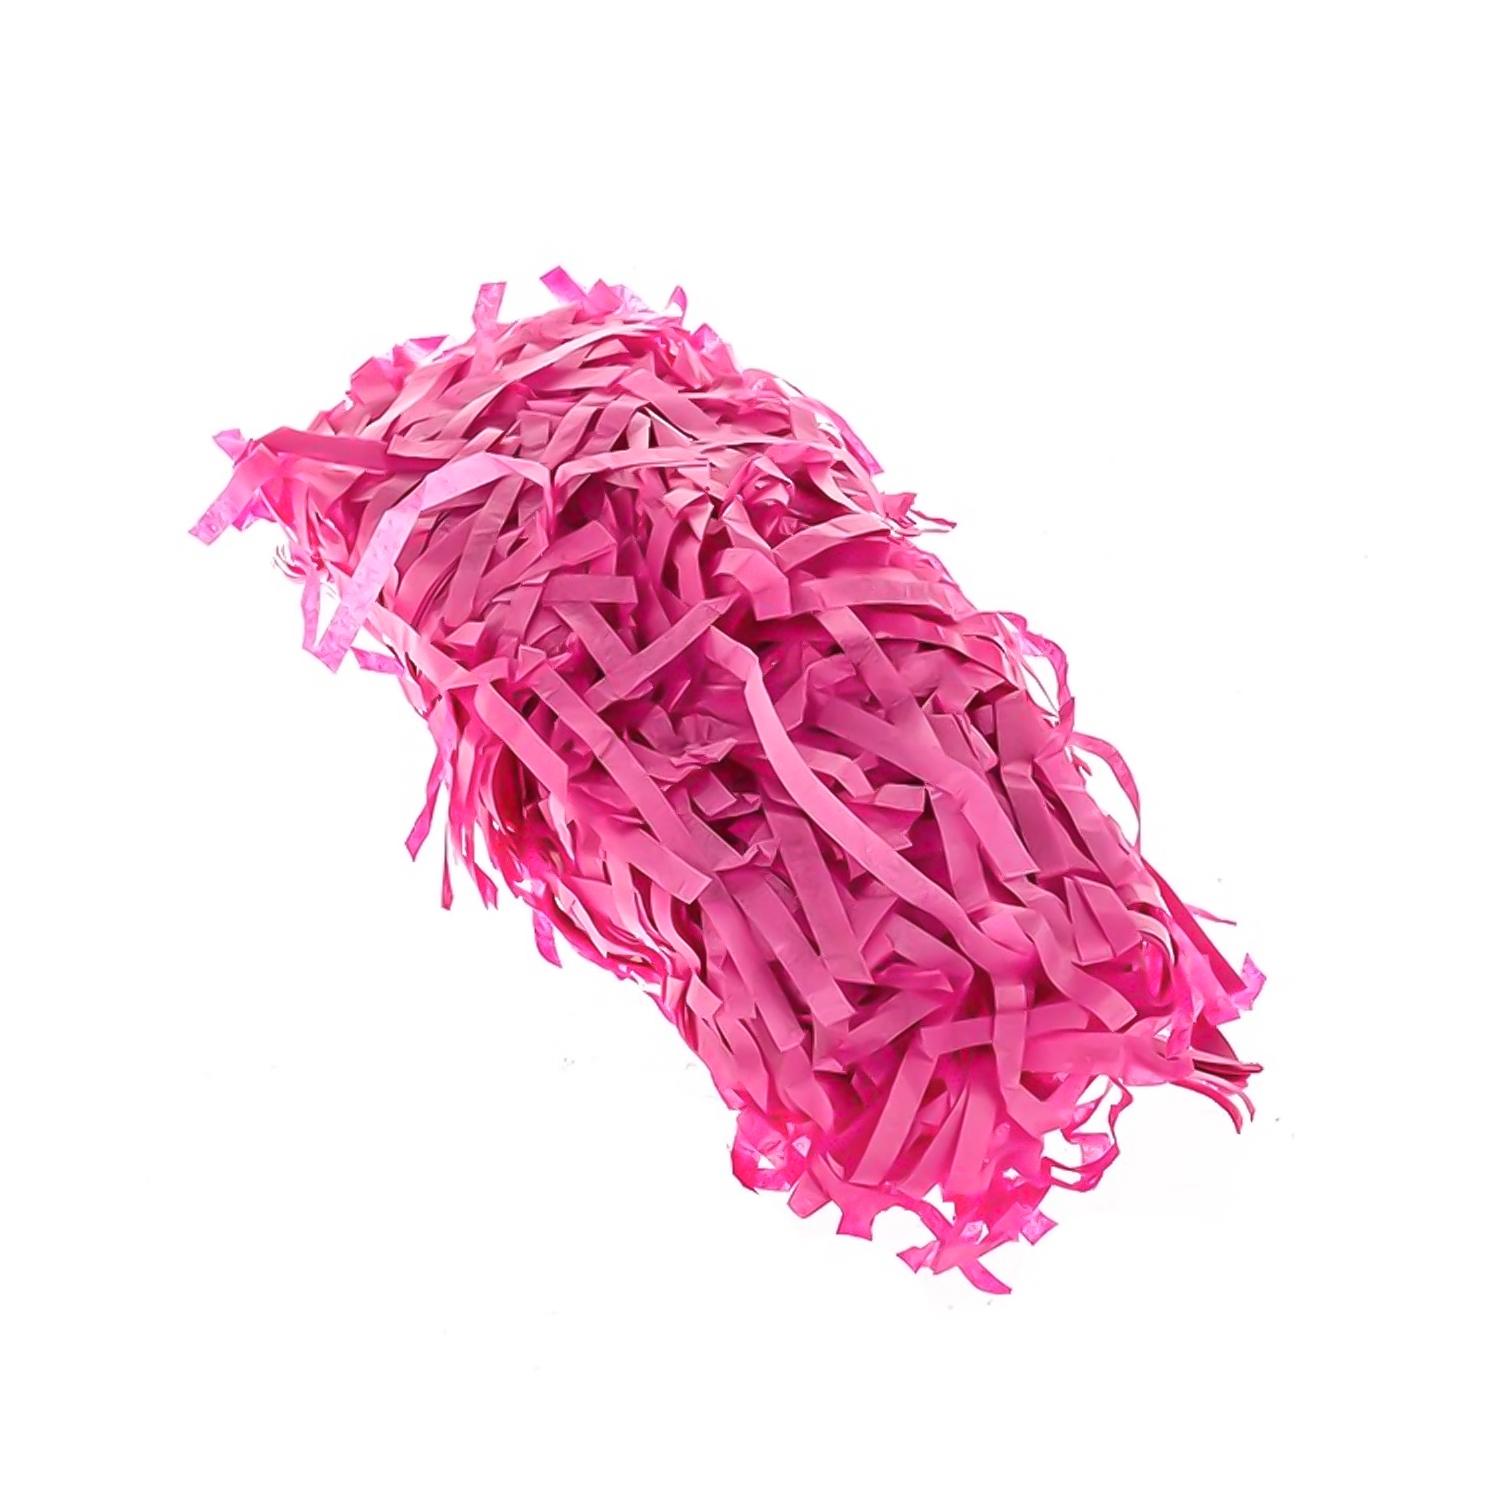 ELECTRIC PINK SHREDDED PAPER